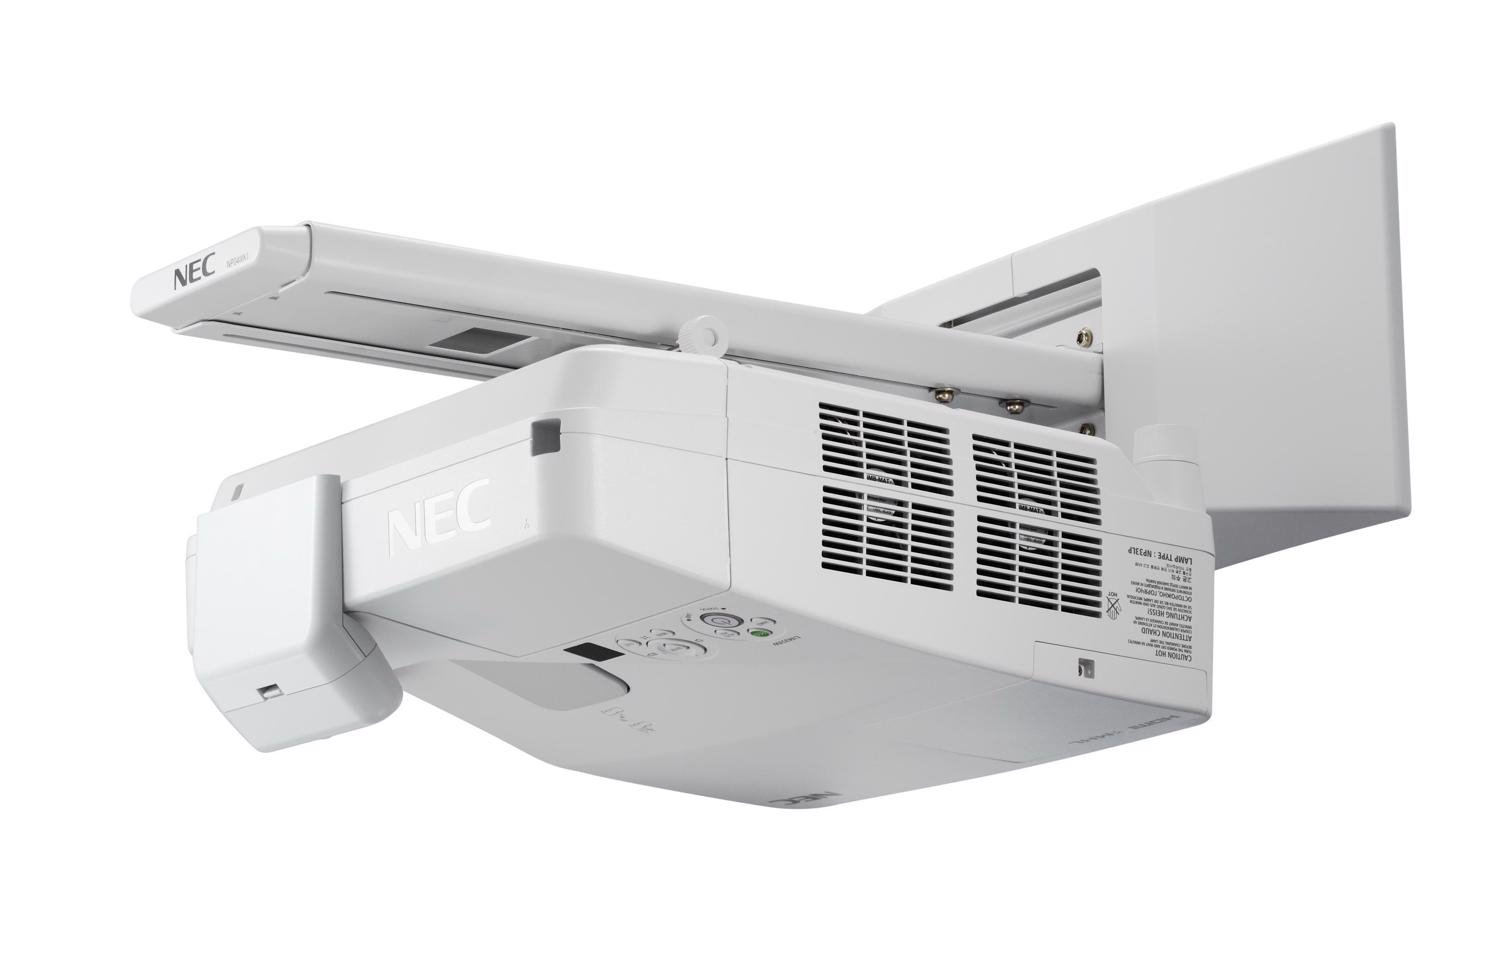 NEC Display NP-UM361Xi LCD Projector - 4:3 - White